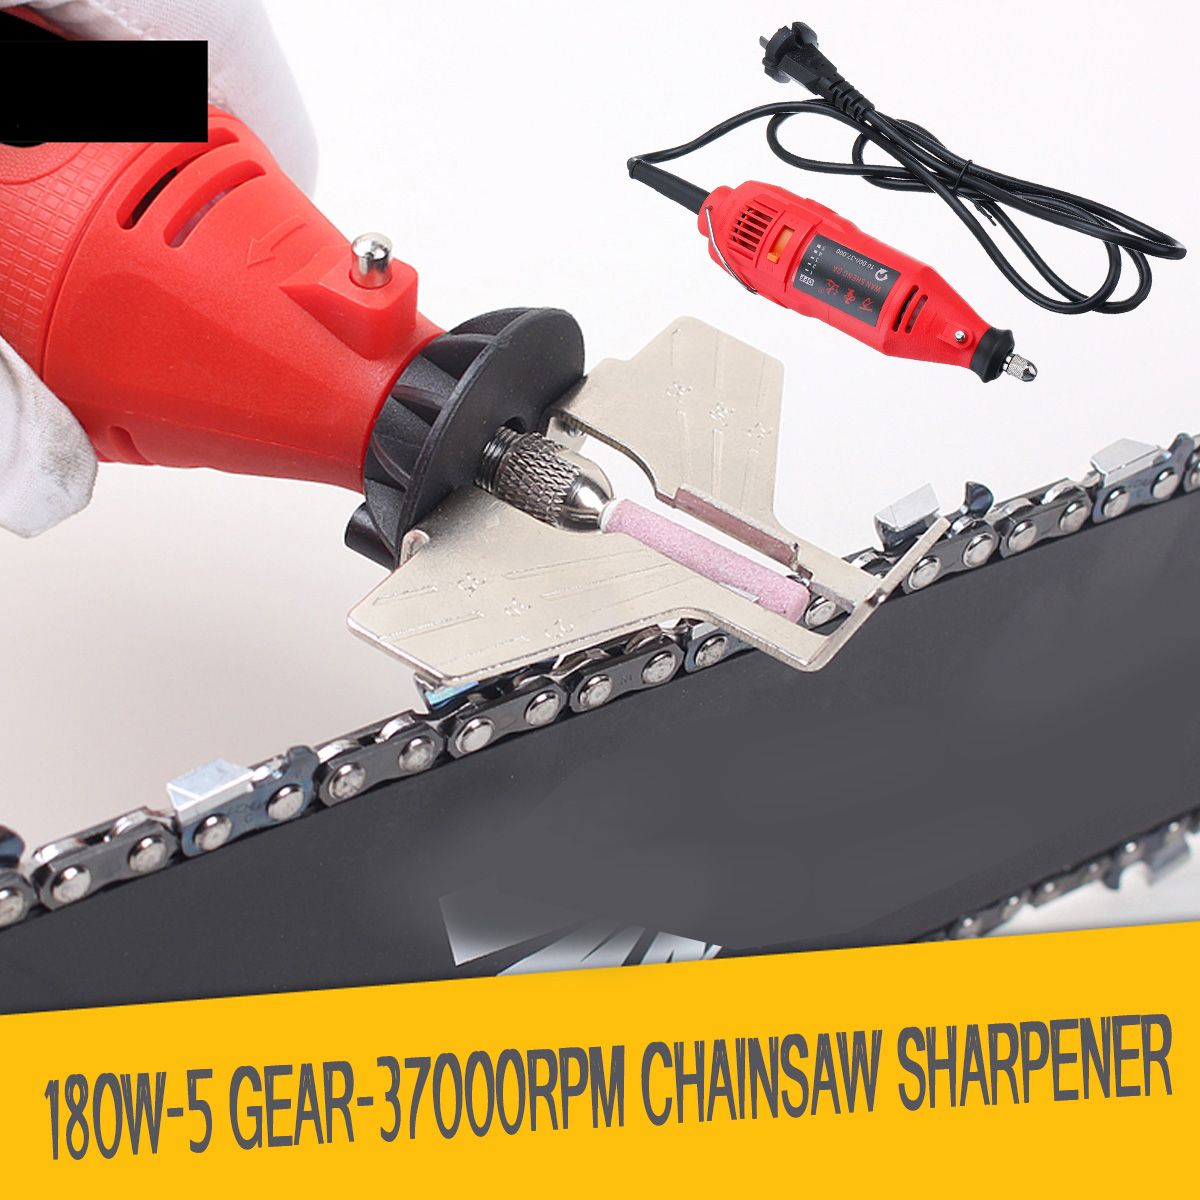 180W-5Speed-37000rpm-Power-Chain-Saw-Sharpener-Chainsaw-Electric-Grinder-Pro-Tools-1516539